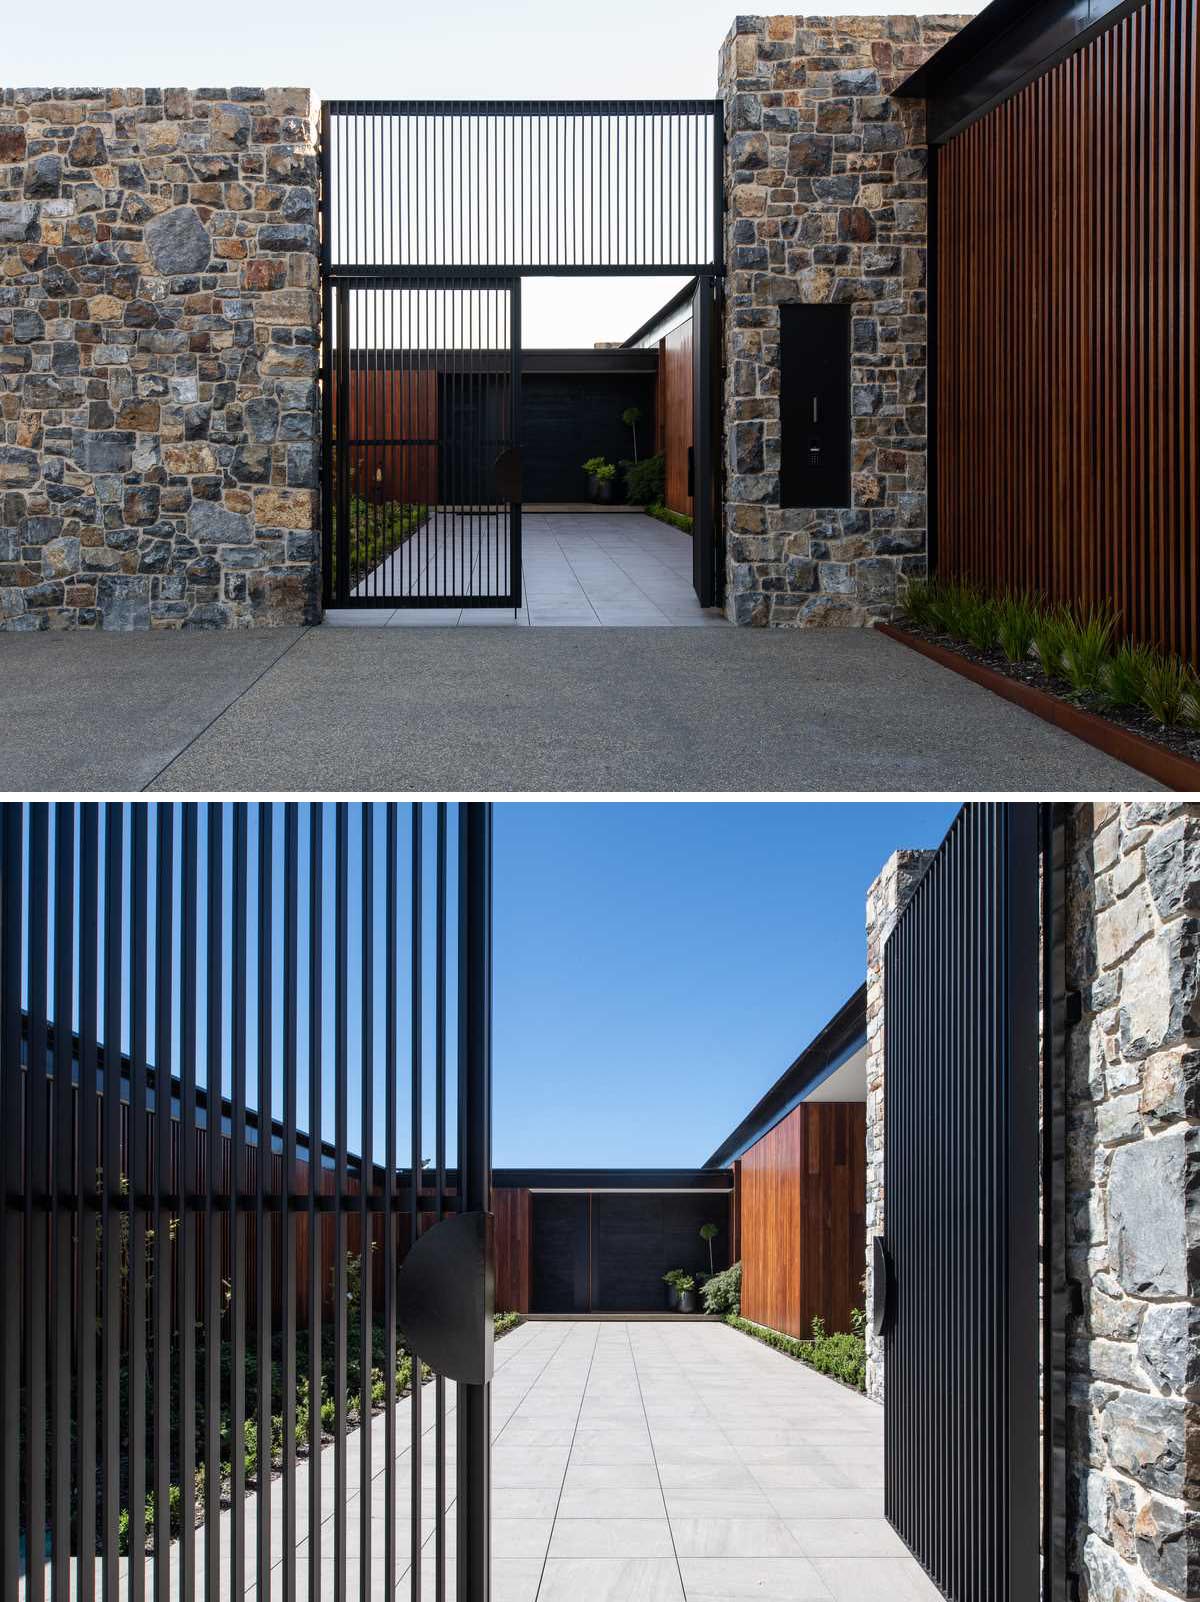 The entry gate opens up to a courtyard with low ground cover and a wide pathway.